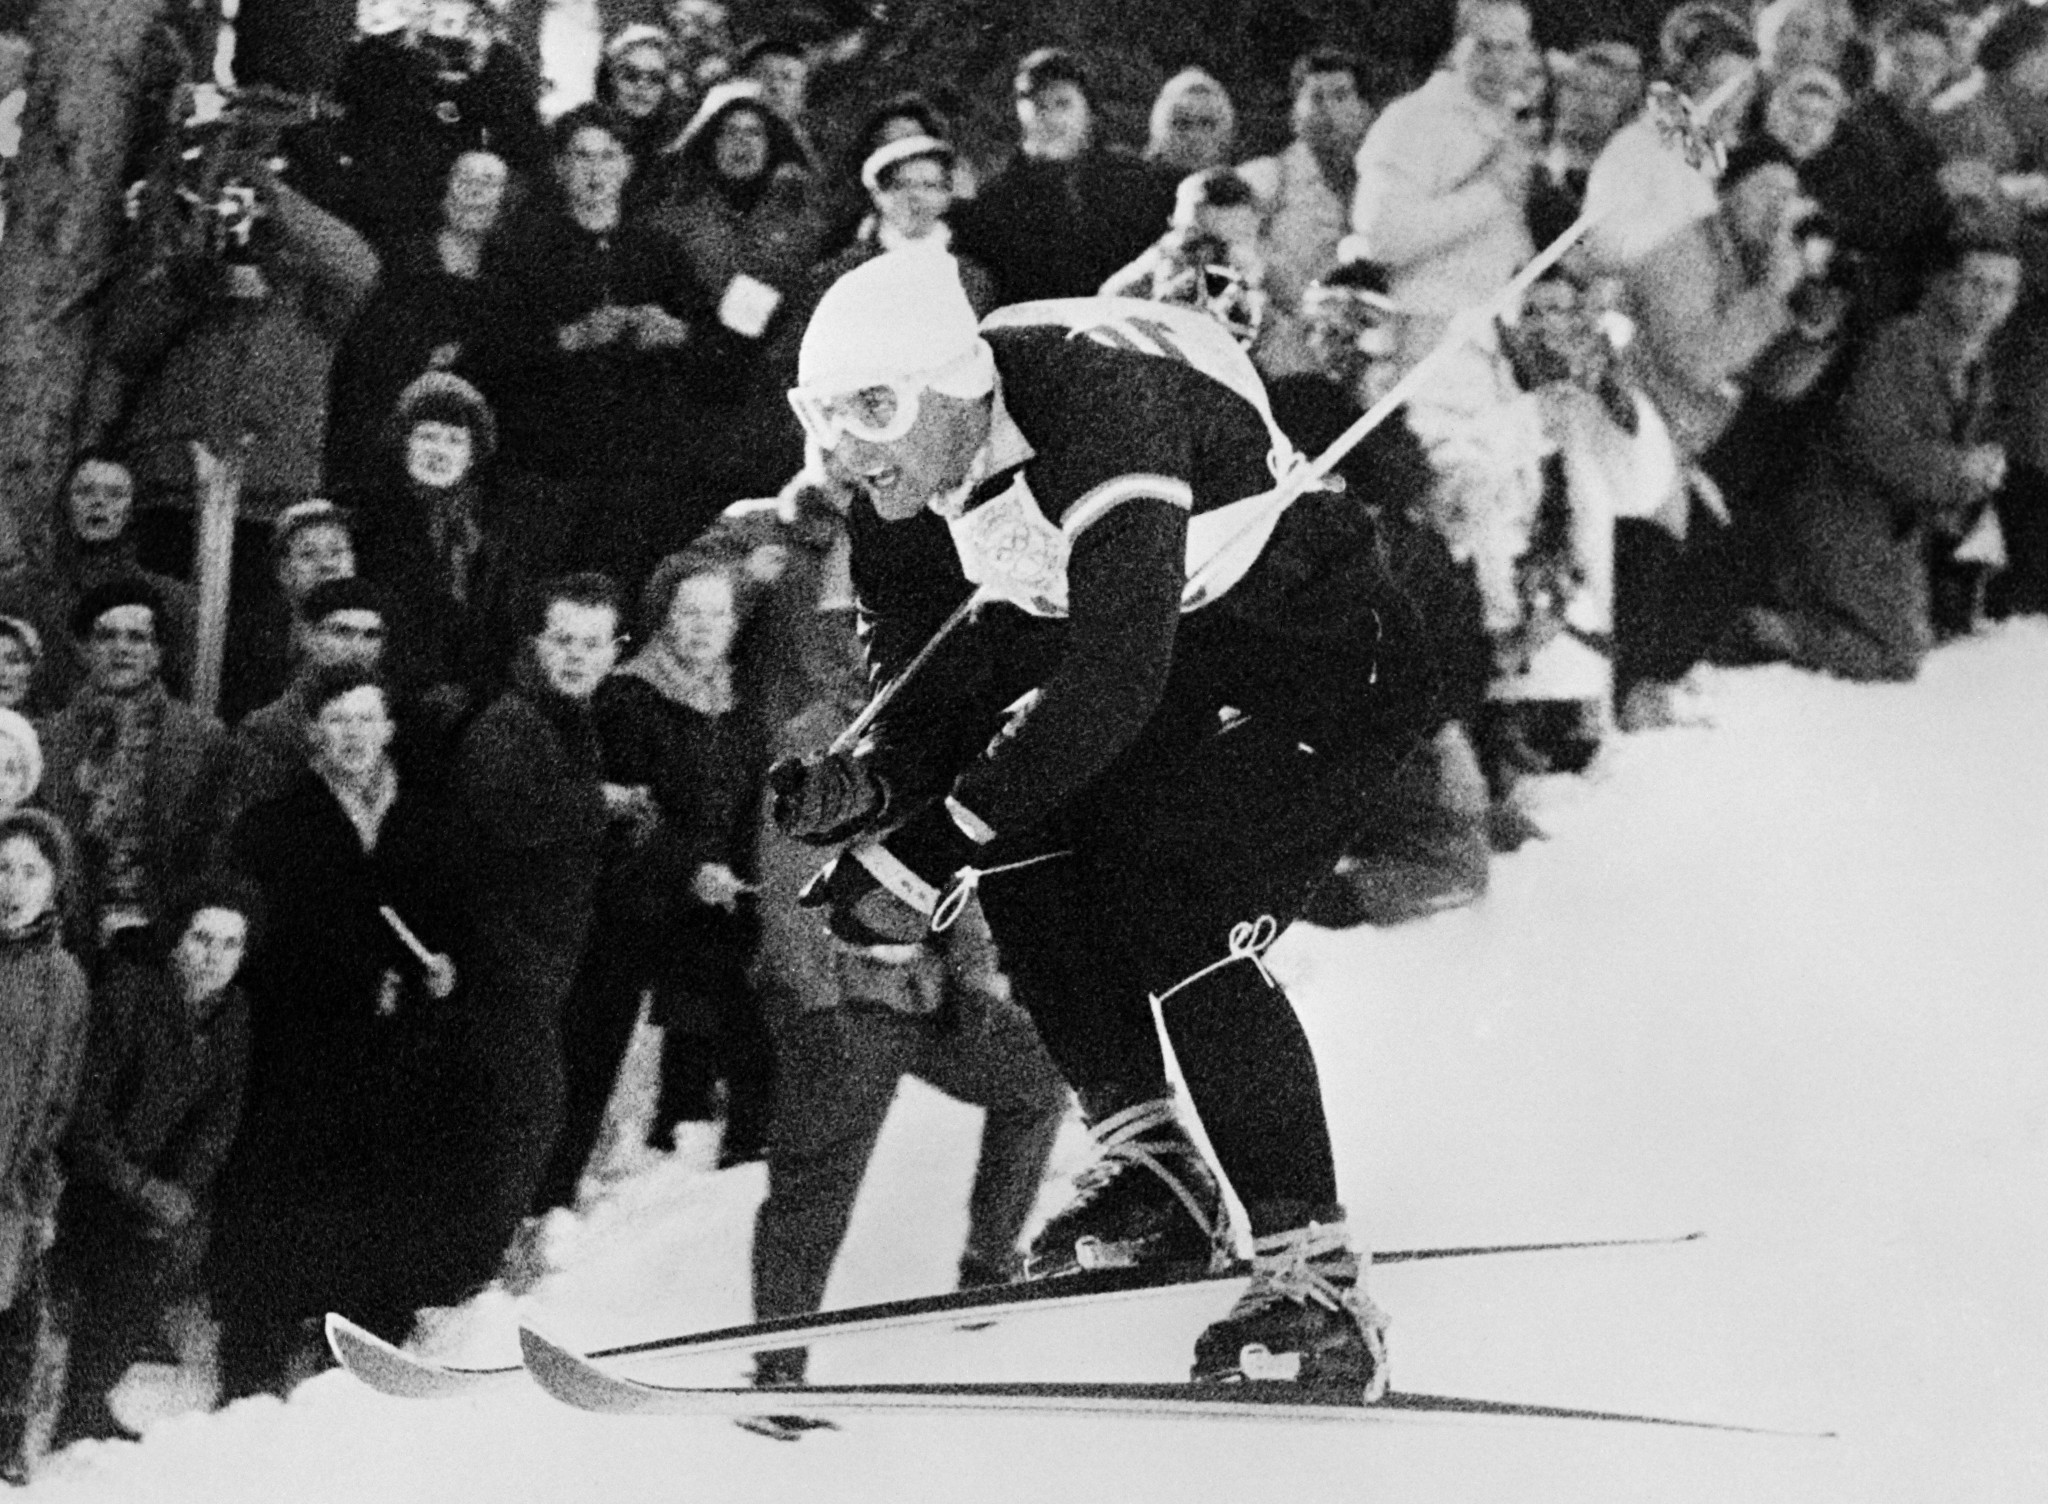 Austrian skier Toni Sailer was a superstar at the 1956 Winter Olympics ©Getty Images